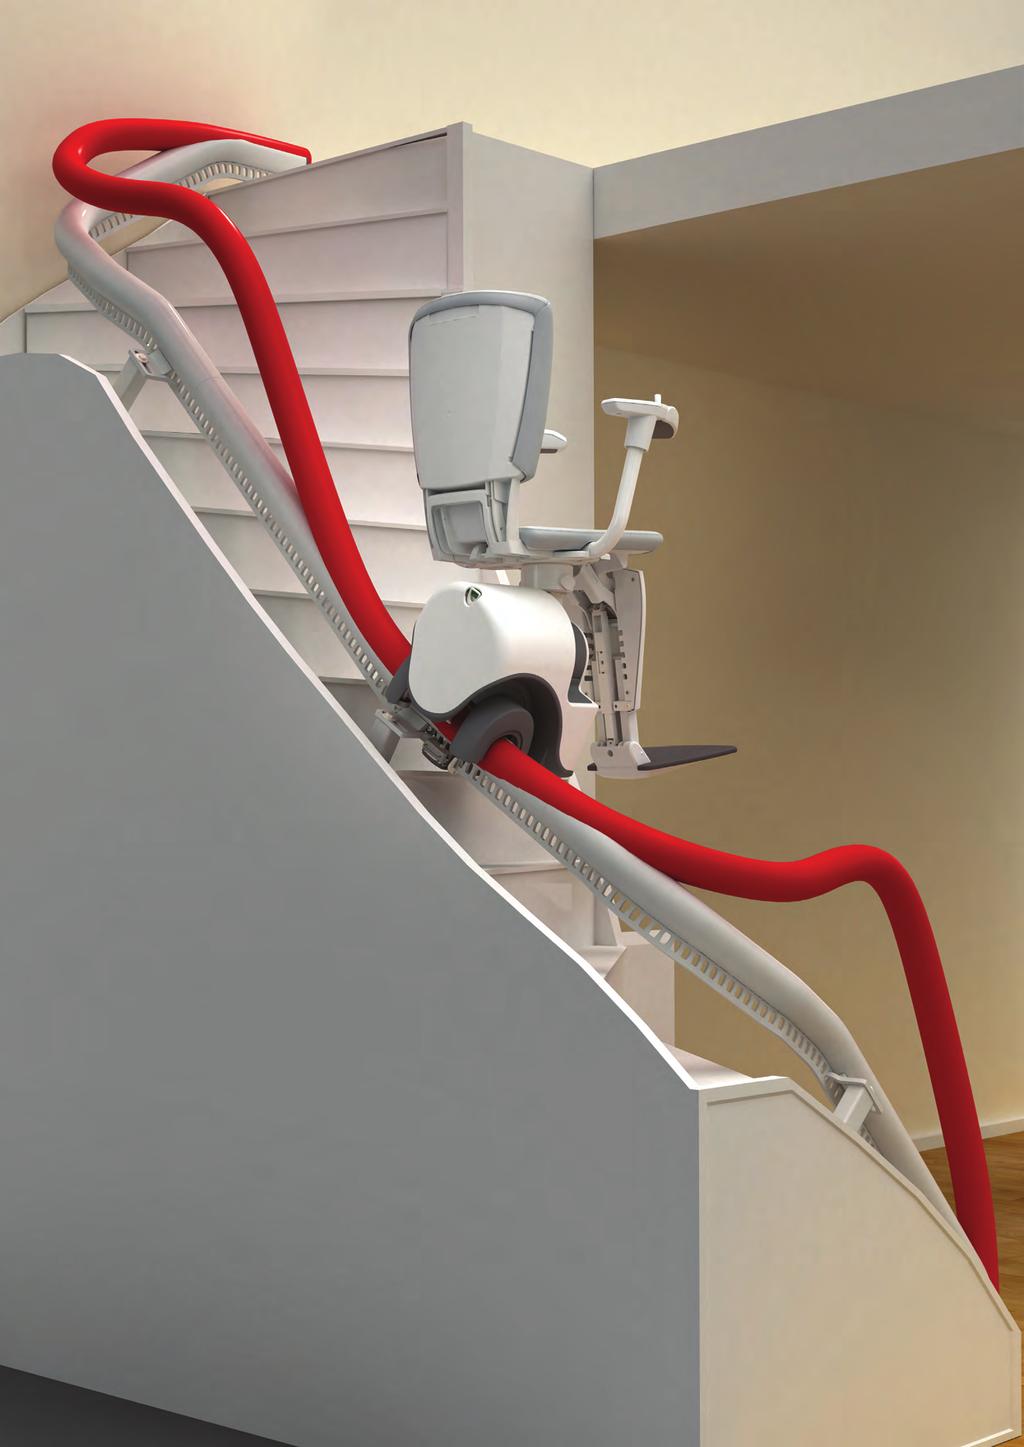 The seat is always in the correct position to get on and off safely The Flow2 swivels as it travels, this means that getting on and off the lift at either end of the staircase is quick and easy.